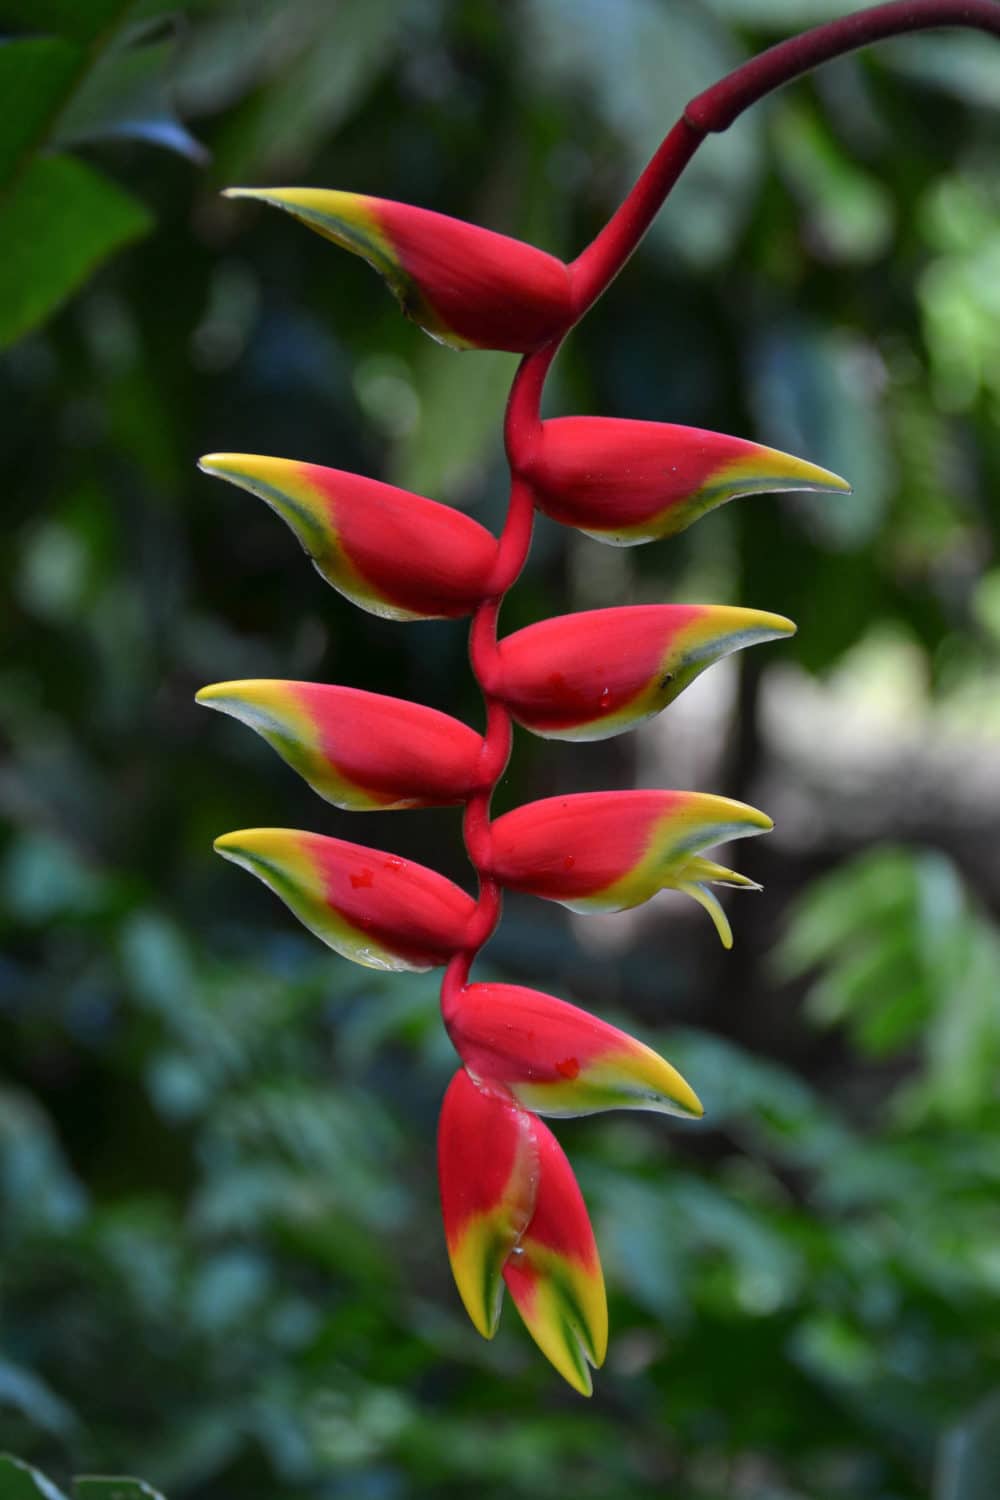 Lobster Claw flower in the botanical gardens near Soufriere, St. Lucia